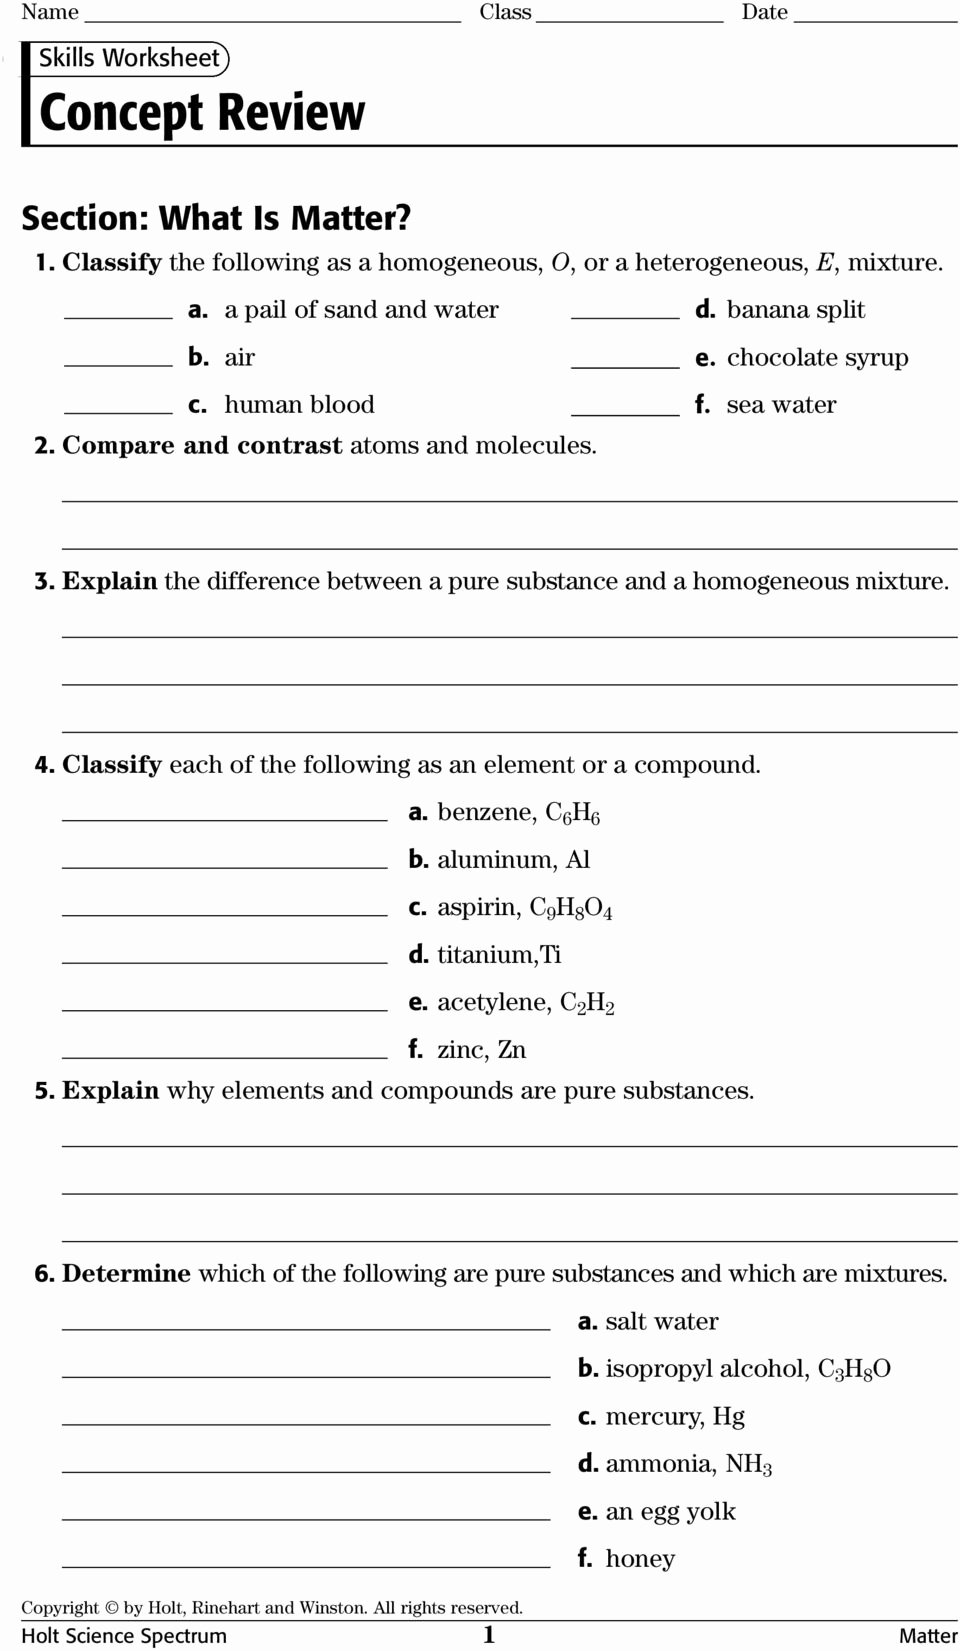 Science Skills Worksheet Answer Key Best Of Physical Science Concept Review Worksheets with Answer